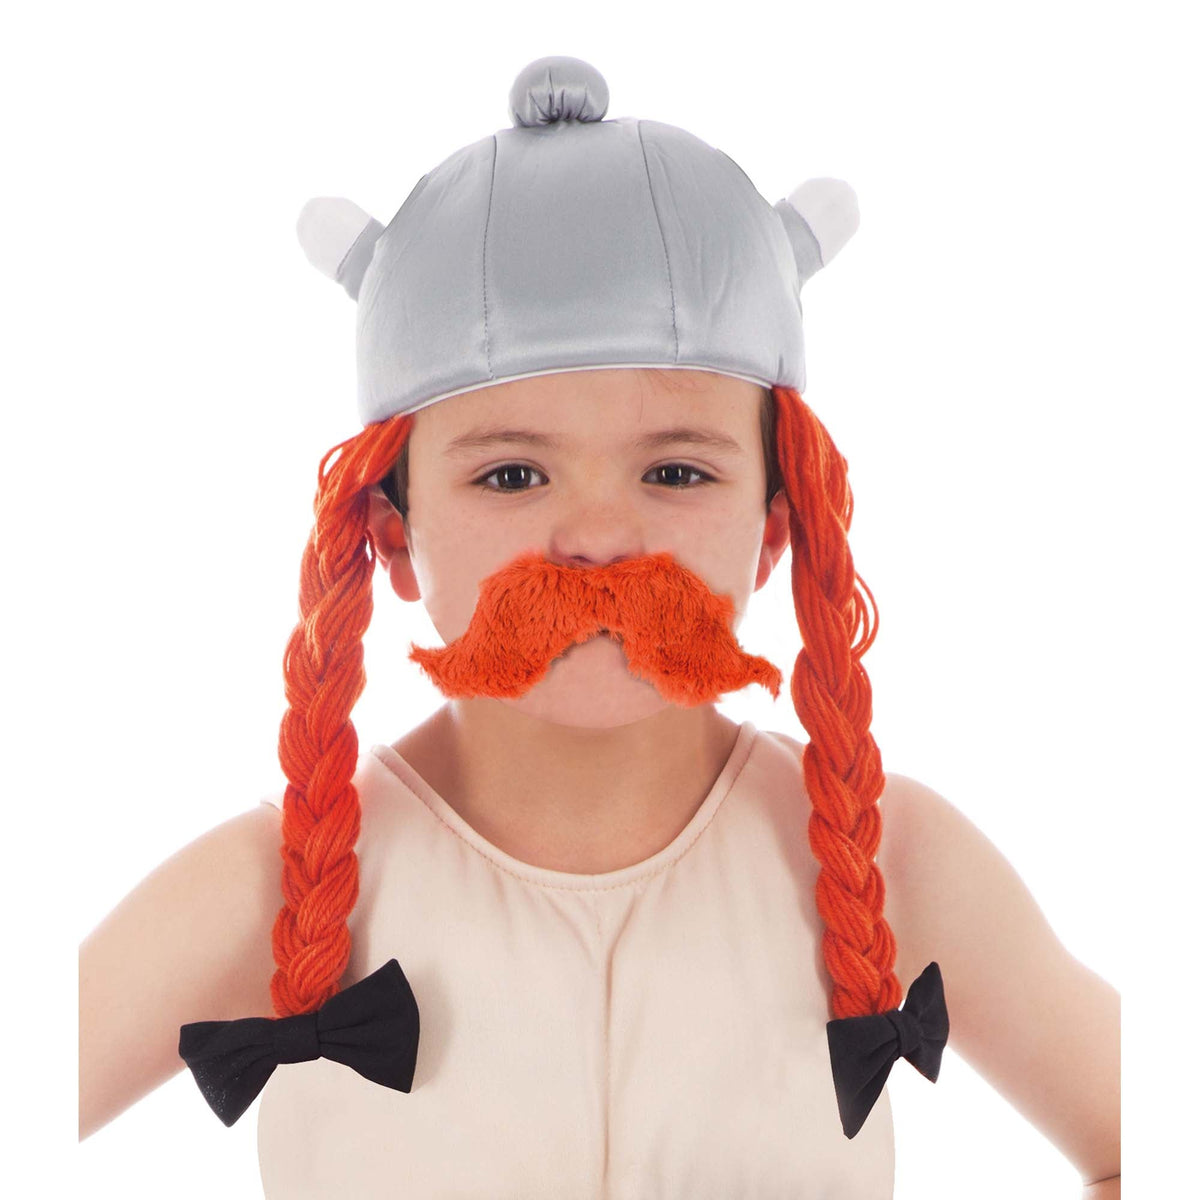 CHAKS Costume Accessories Obelix Hat for Kids, Asterix and Obelix